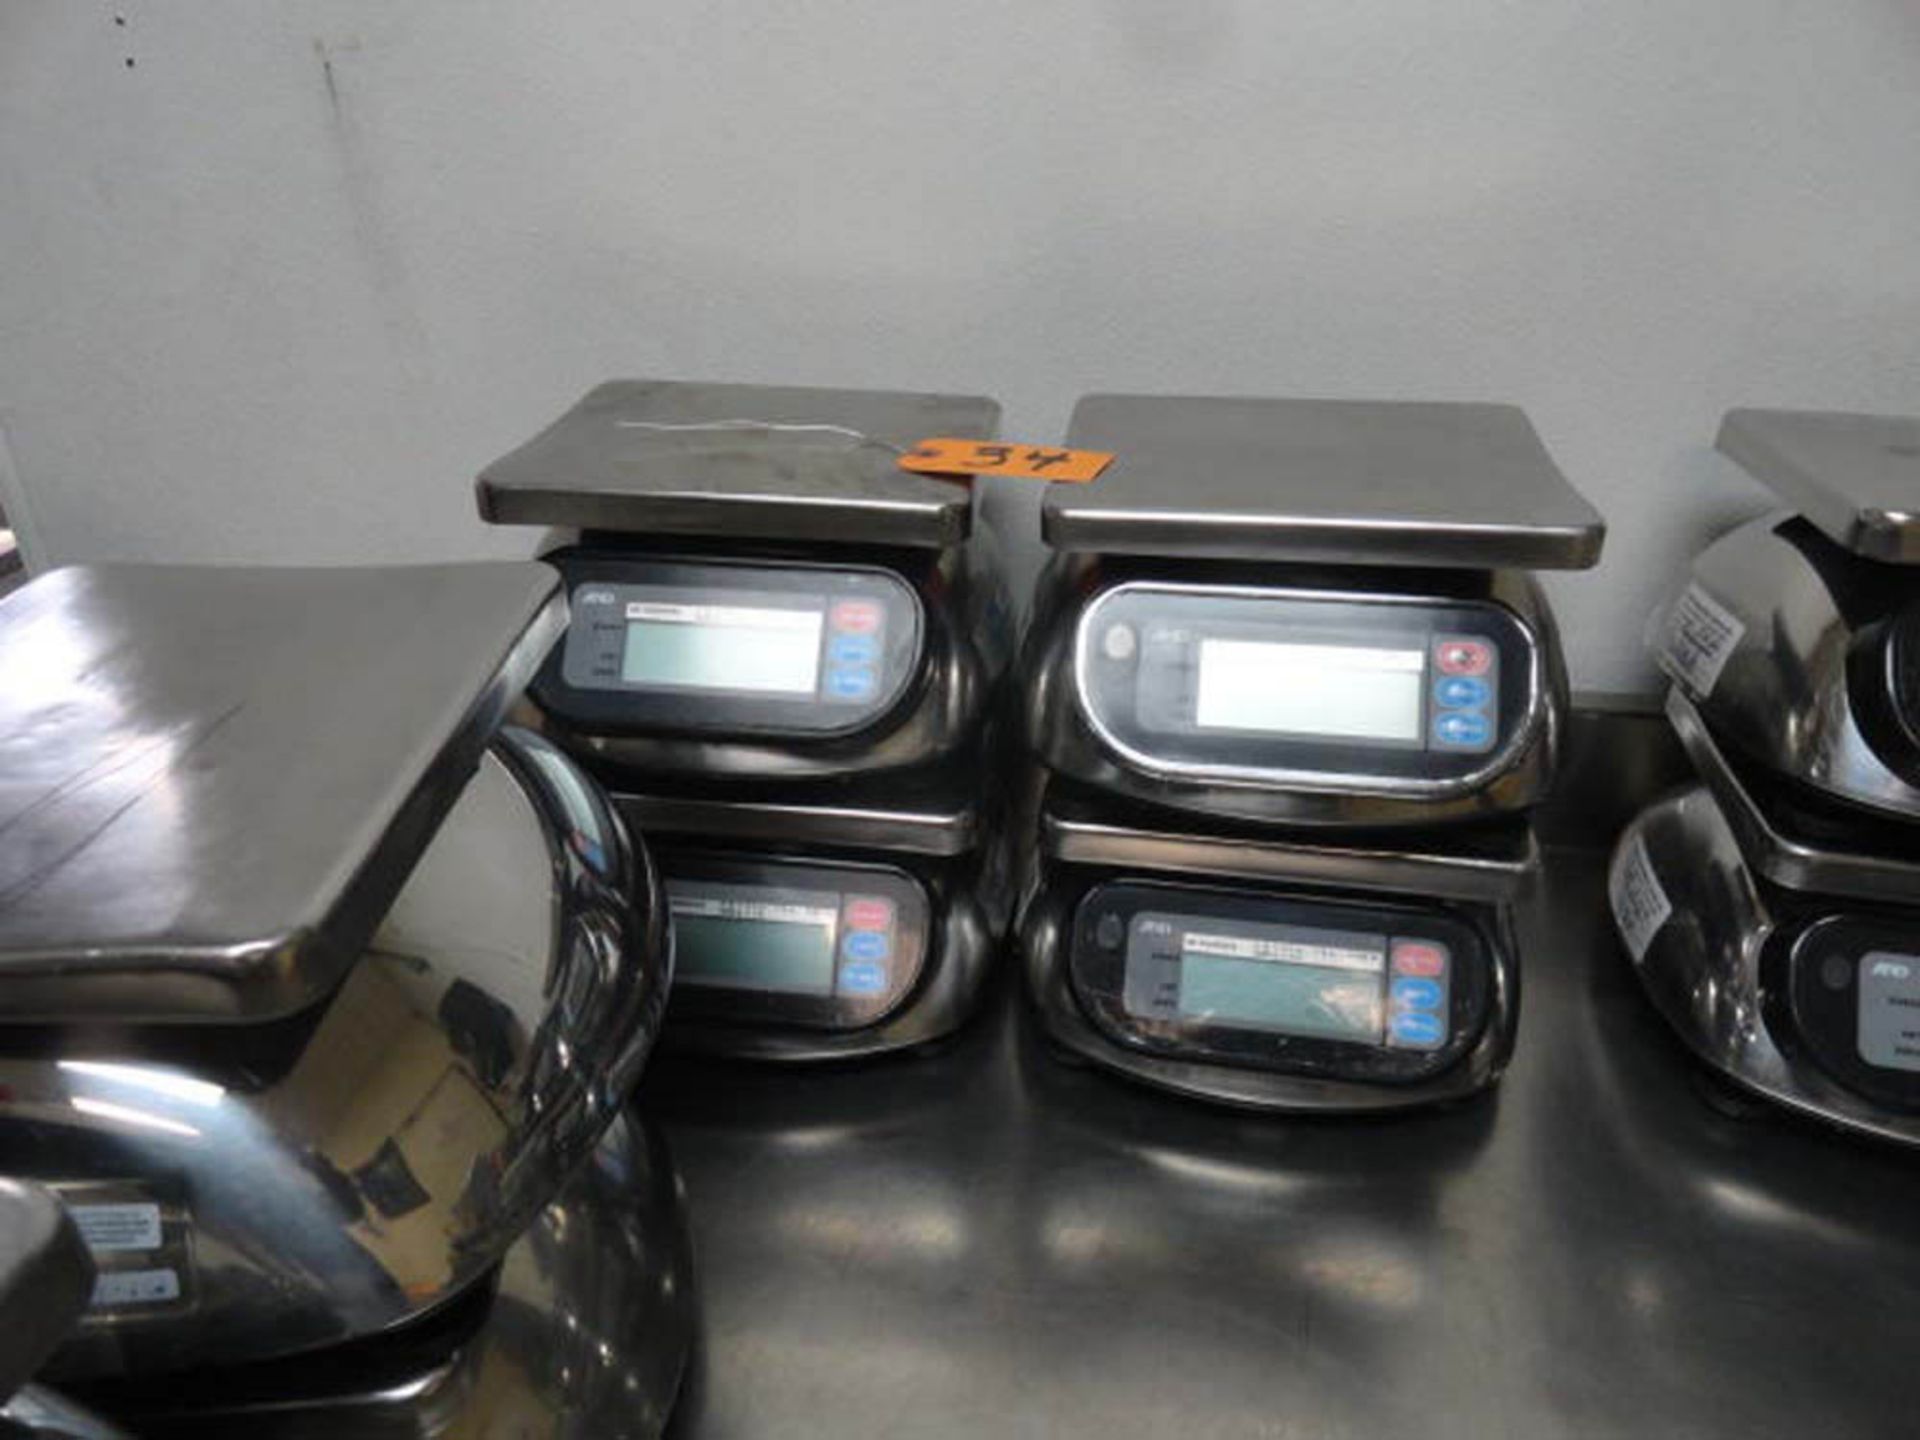 (4) AND DIGITAL SCALE, BATTERY OPERATED, 11# X 0.1, 5000 GRAM